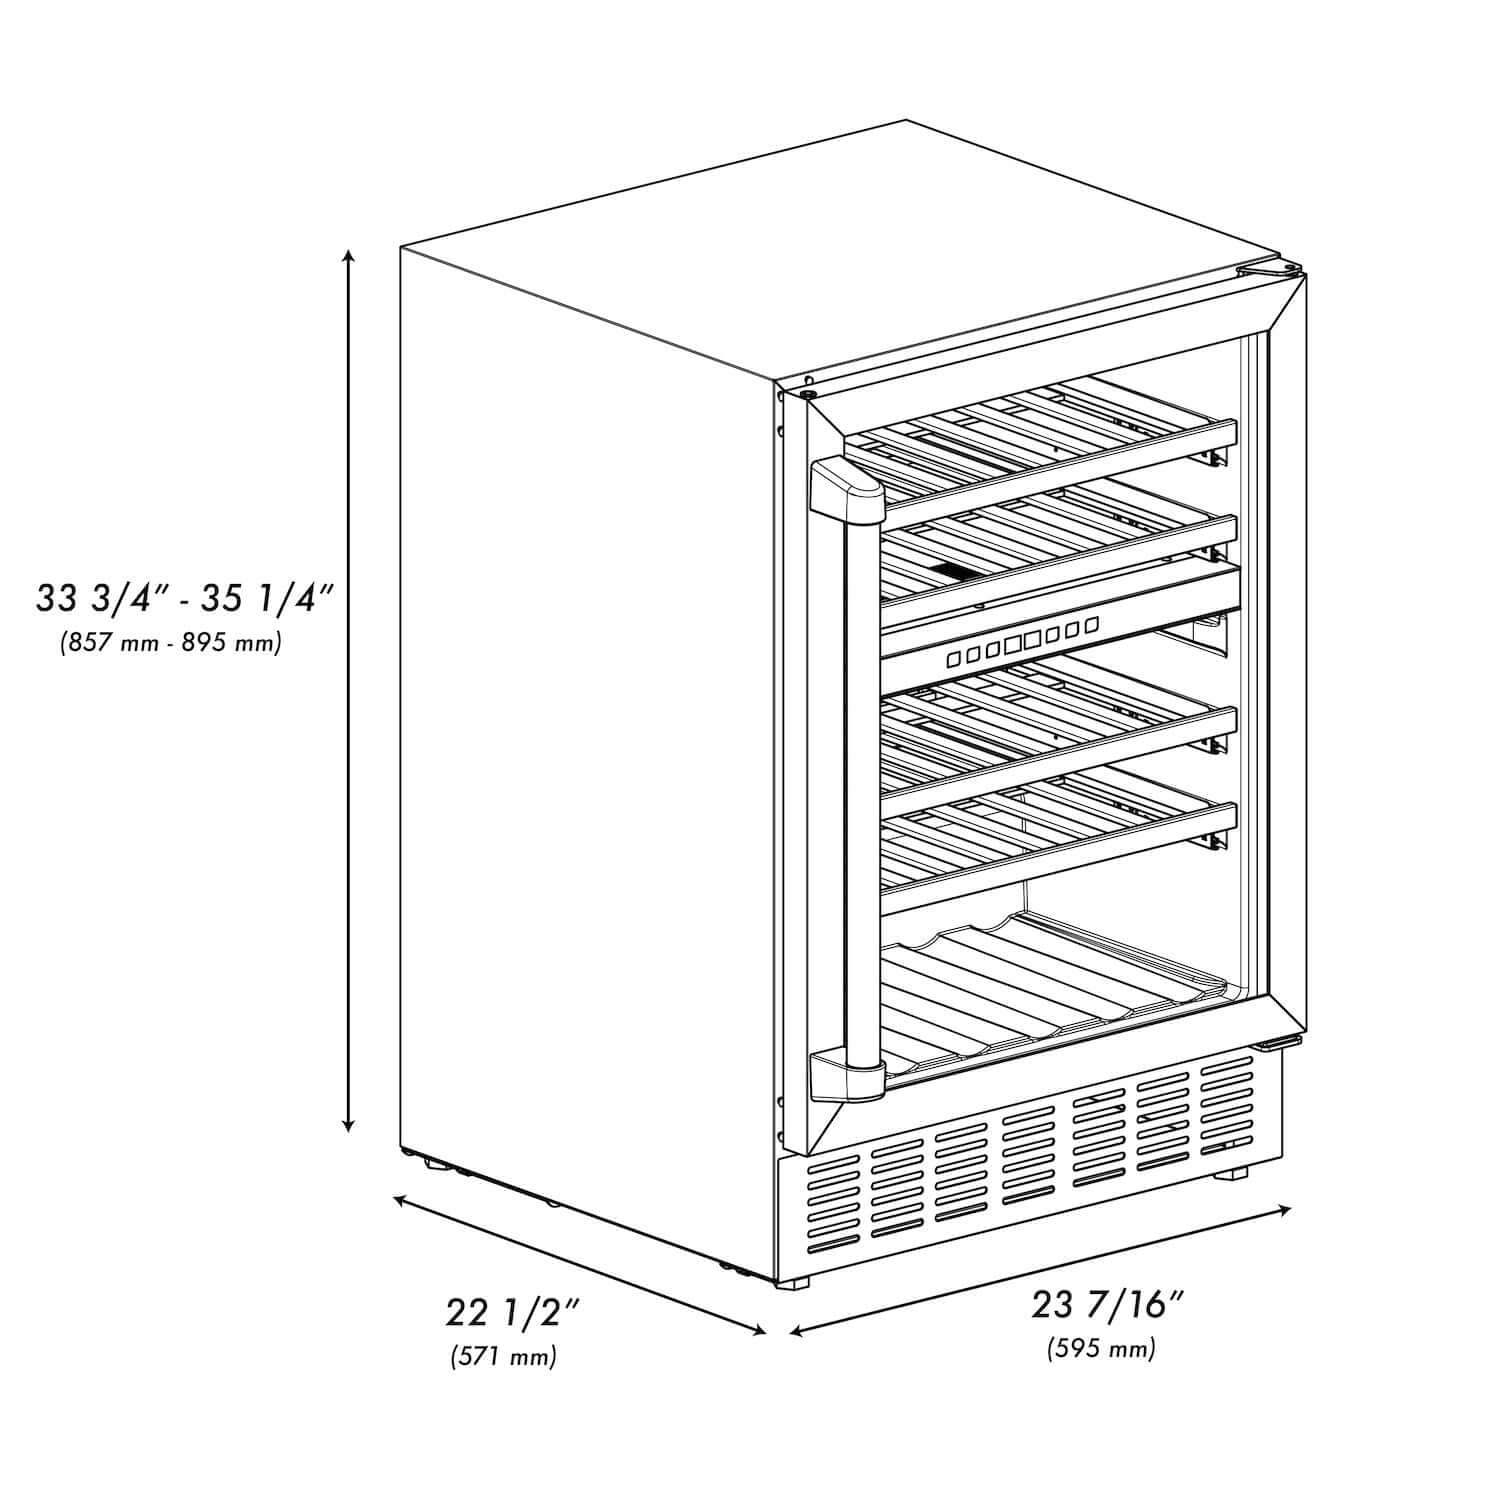 ZLINE 24 In. Monument Dual Zone 44-Bottle Wine Cooler in Stainless Steel with Wood Shelf (RWV-UD-24) dimensional diagram with measurements.